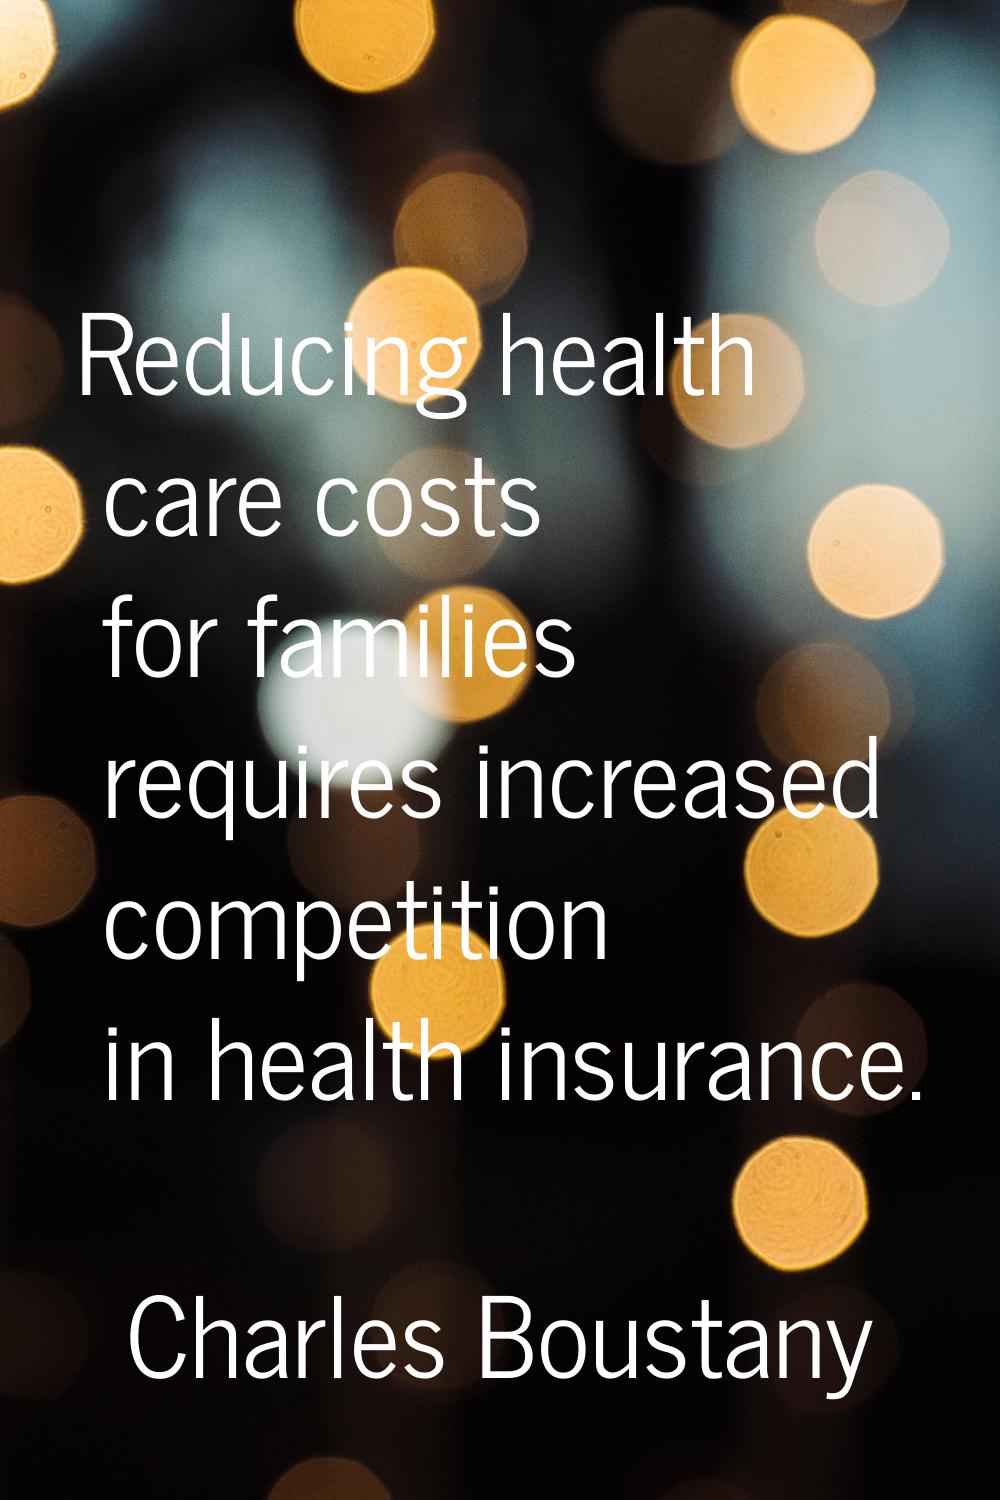 Reducing health care costs for families requires increased competition in health insurance.